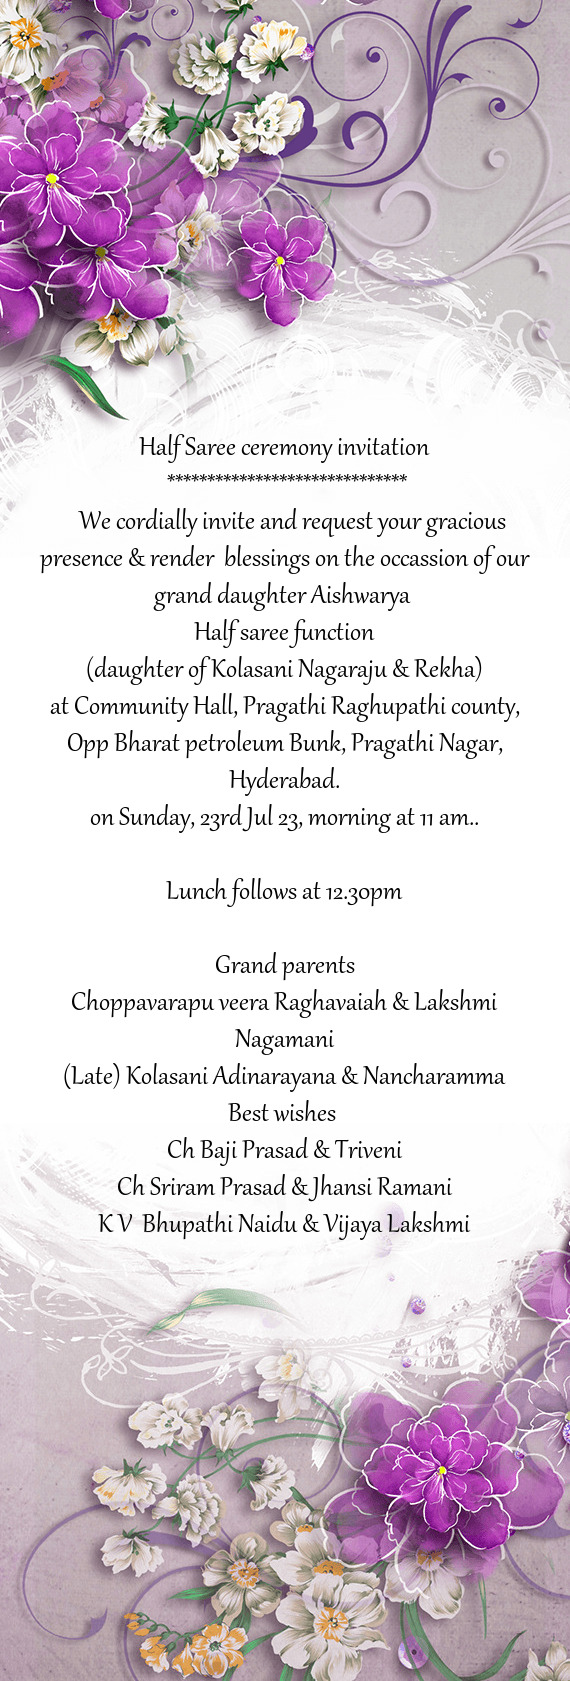 We cordially invite and request your gracious presence & render blessings on the occassion of ou